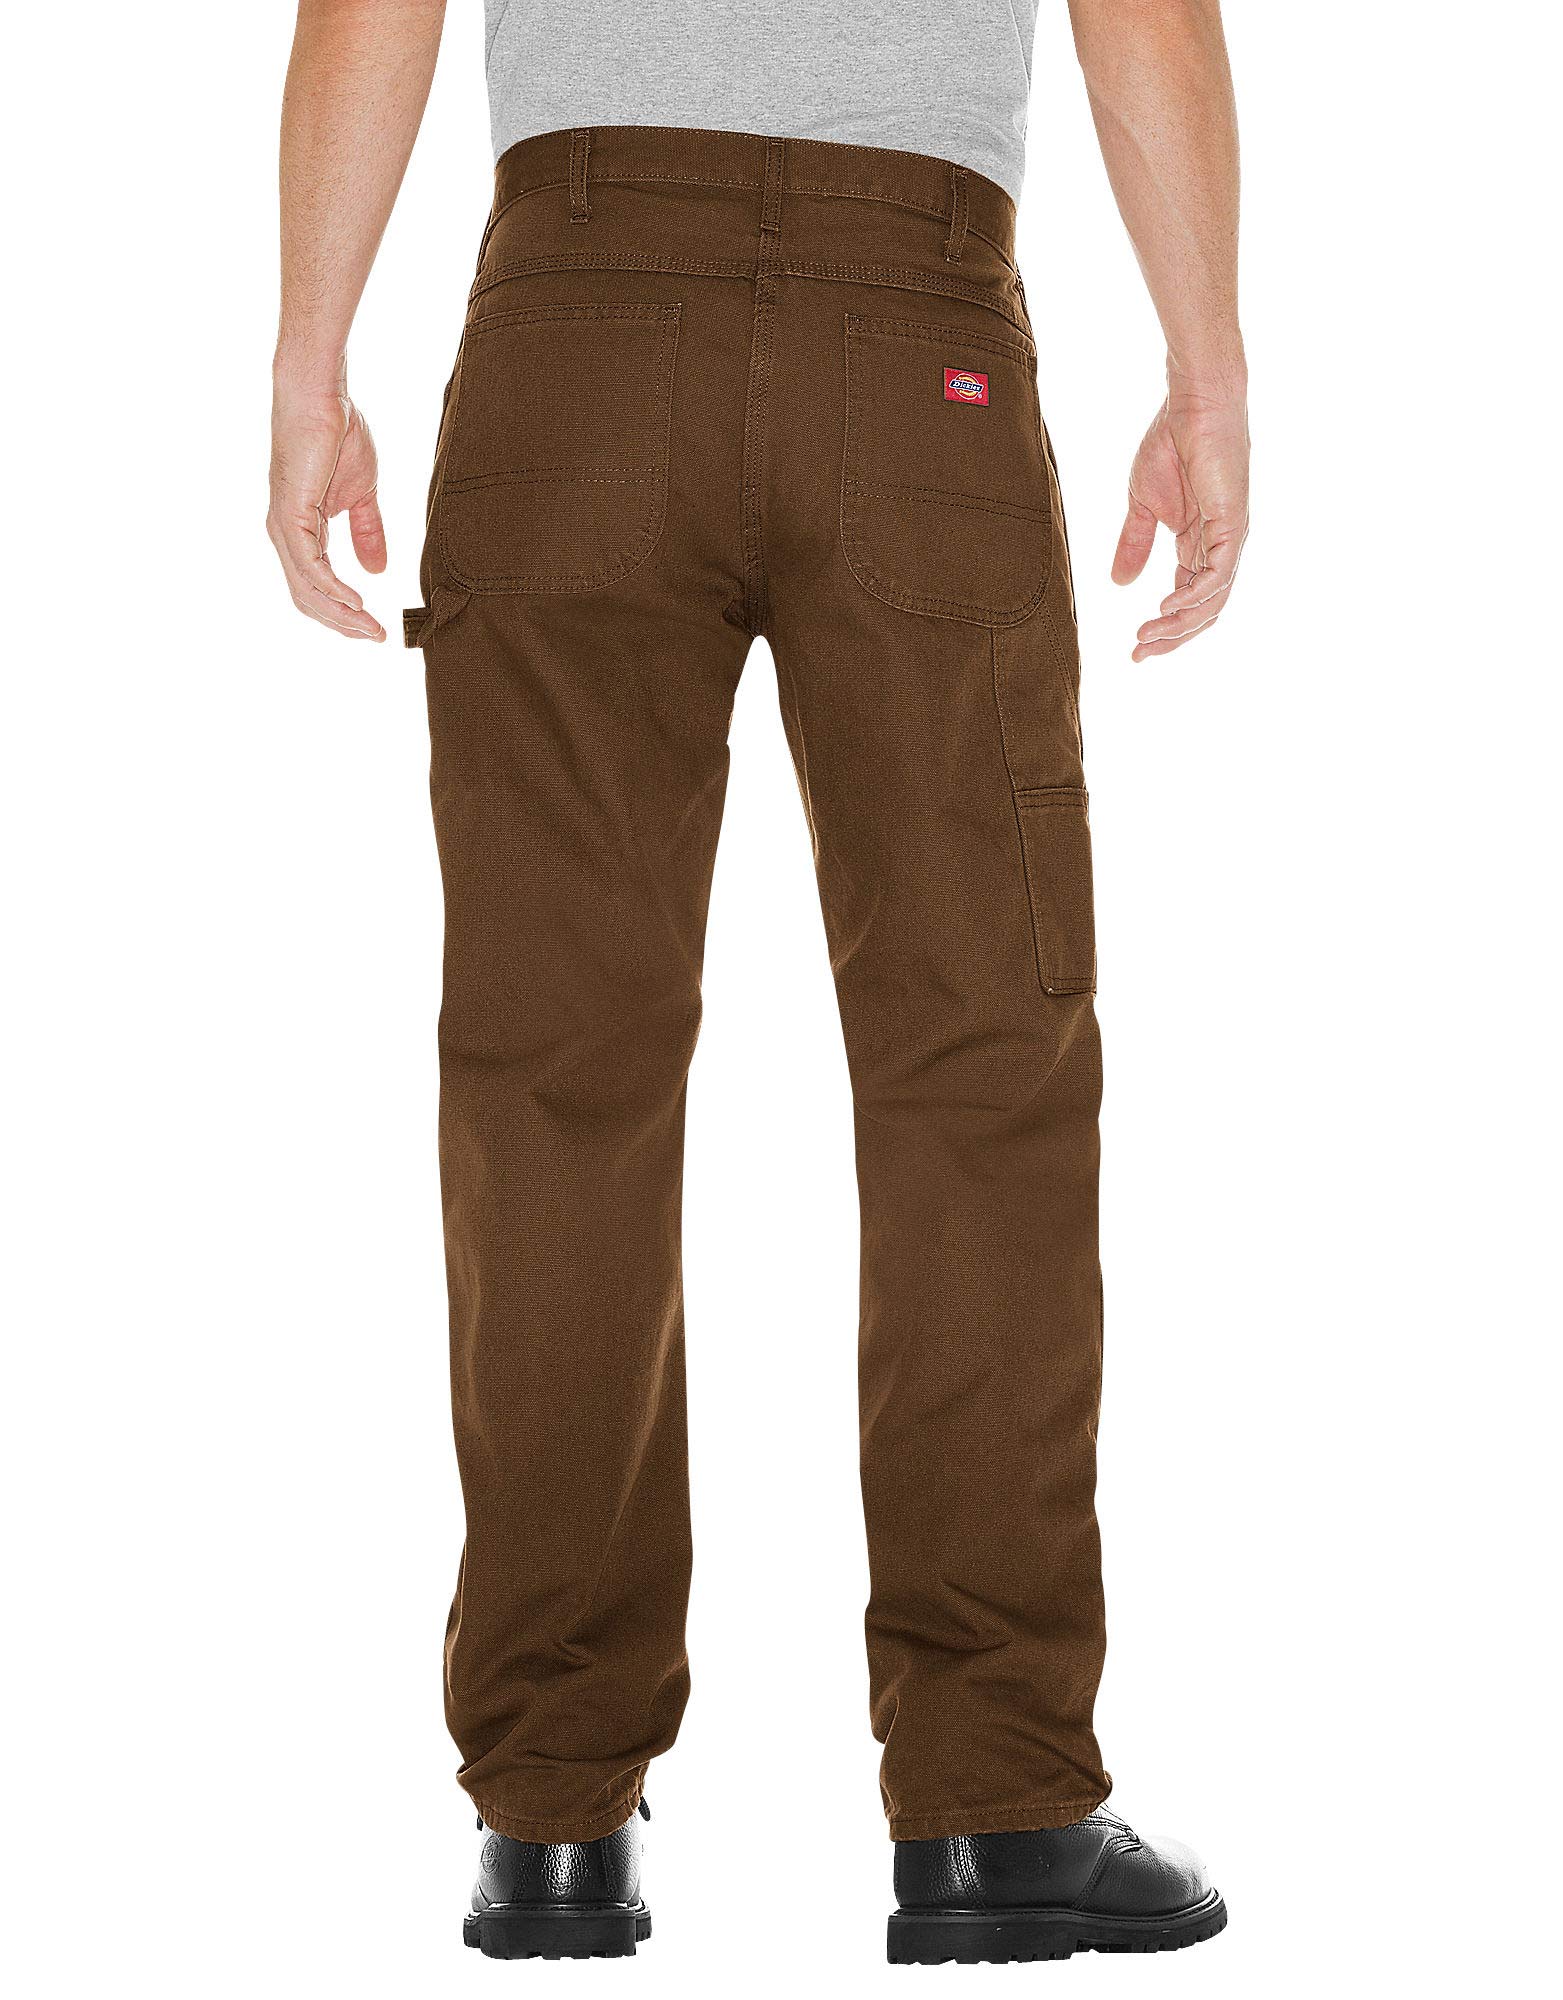 Dickies Relaxed Fit Carpenter Duck Pant - 1939